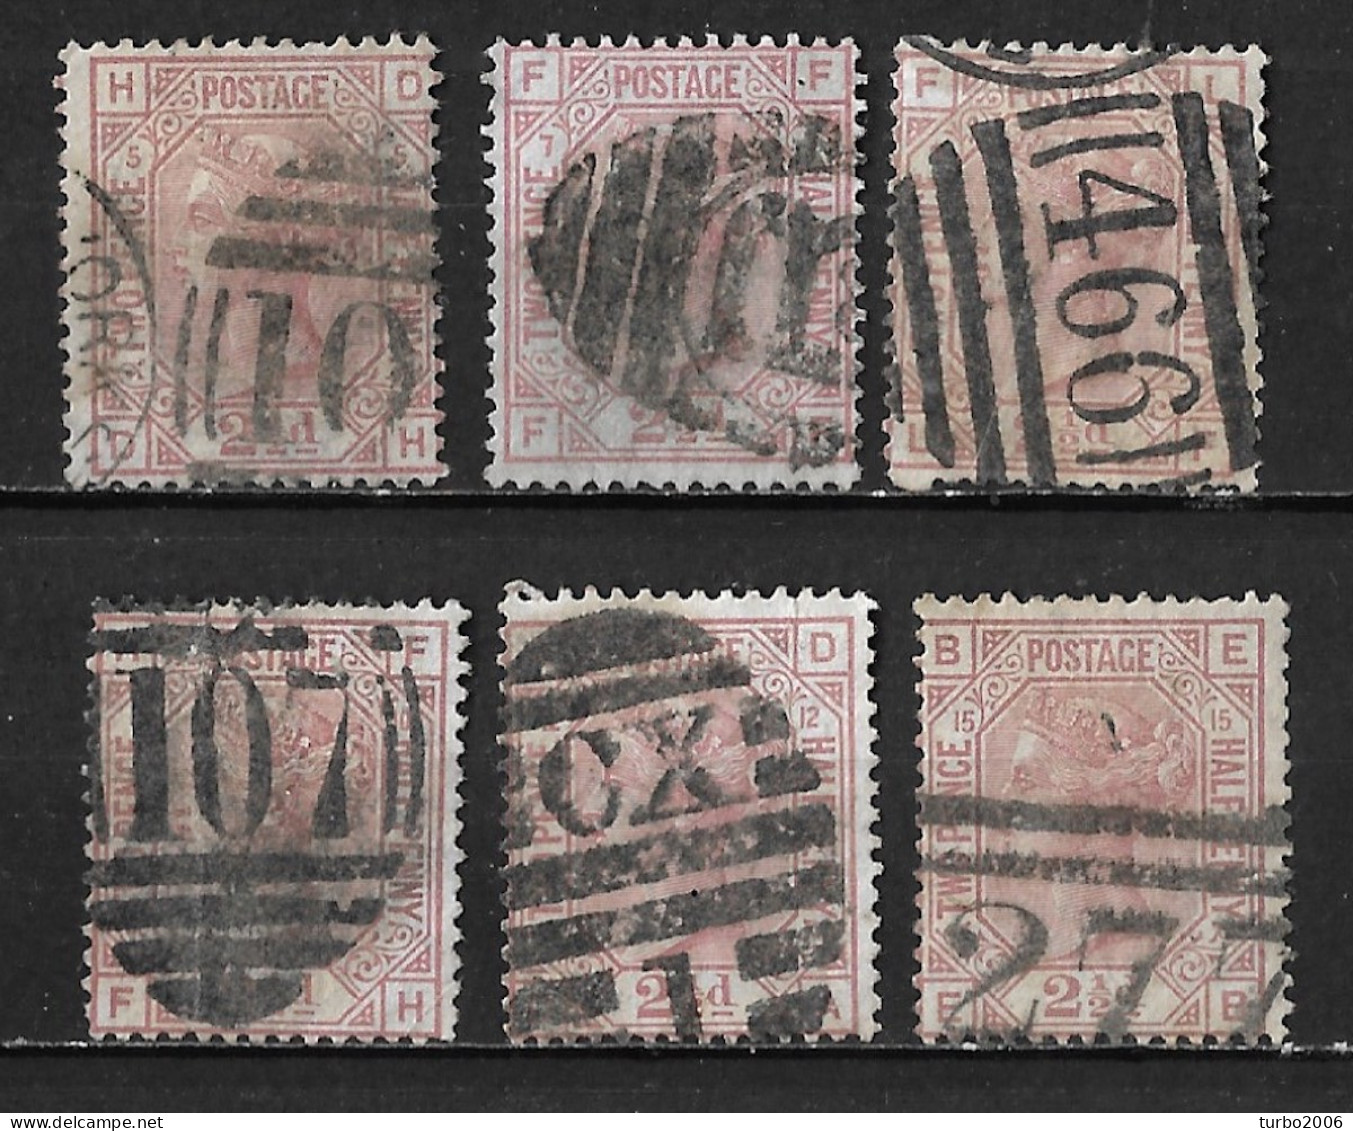 G.B.1876 Queen Victoria 2½ P Lila Rose WM 10 Michel 47 (SG 141) 6 Different Plates 5-7-9-10-12-15 As Shown On 7 Scans - Used Stamps